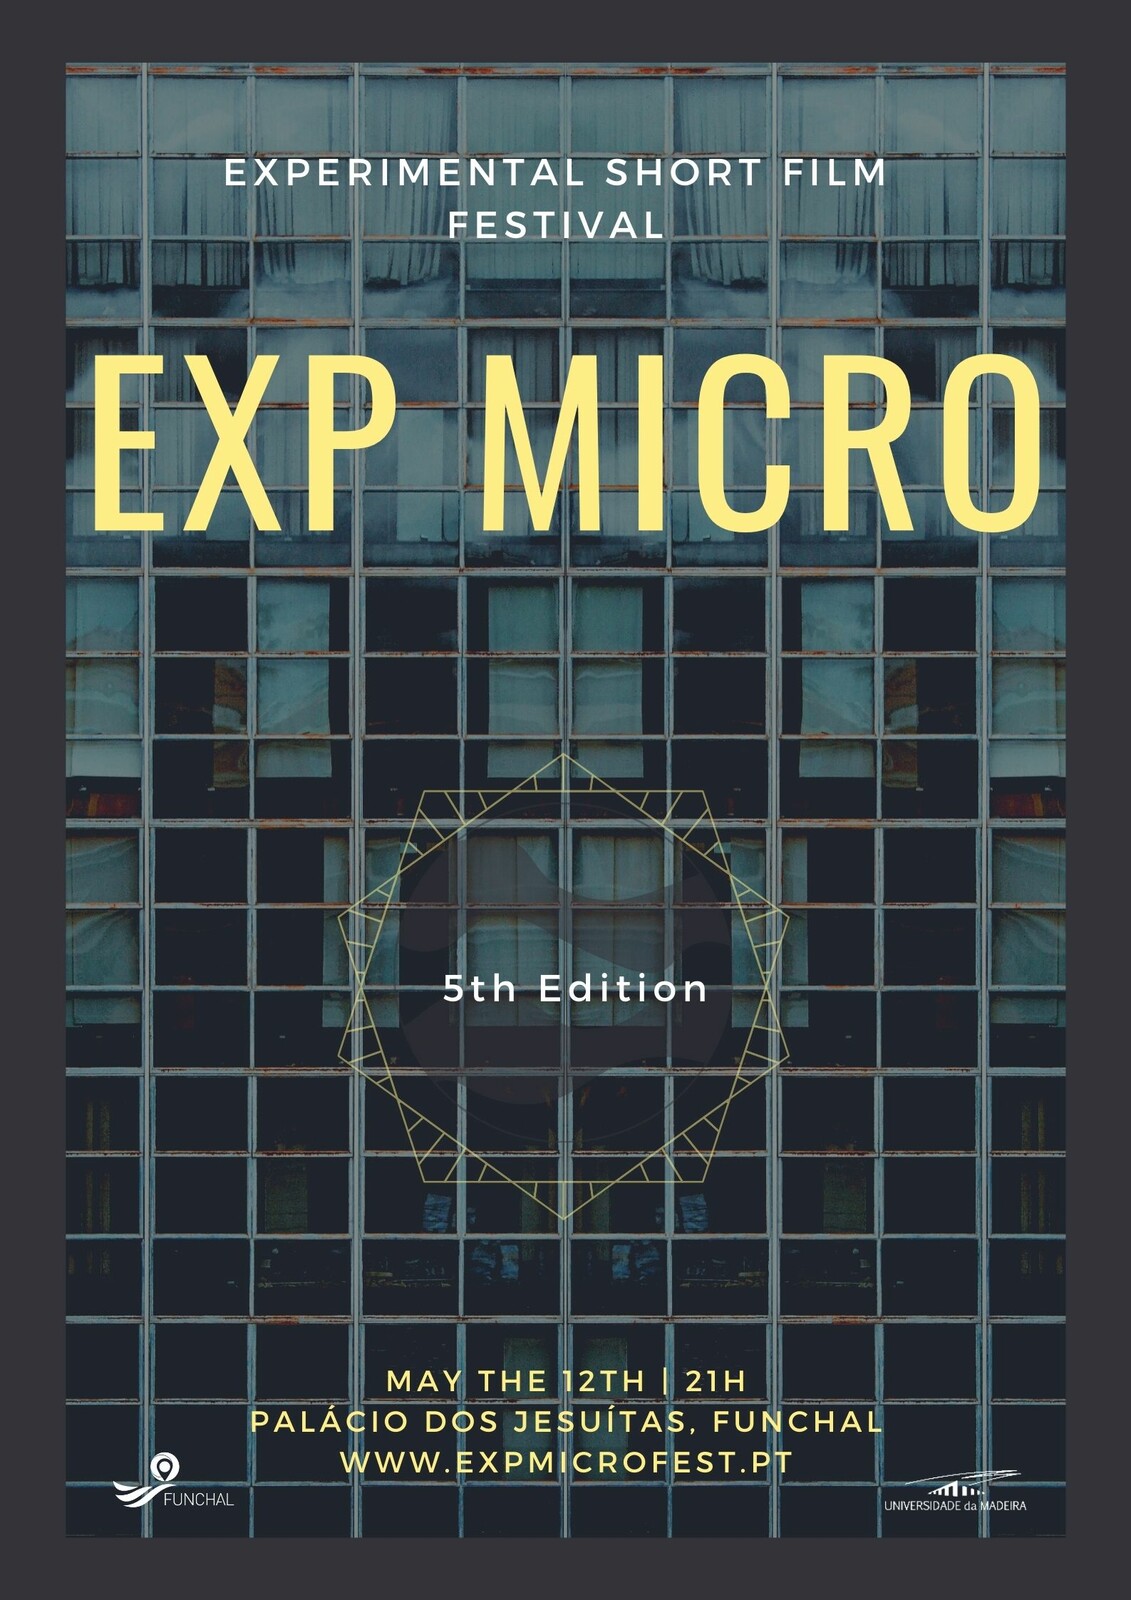 EXP MICRO FEST Poster, 5th Edition (2015)